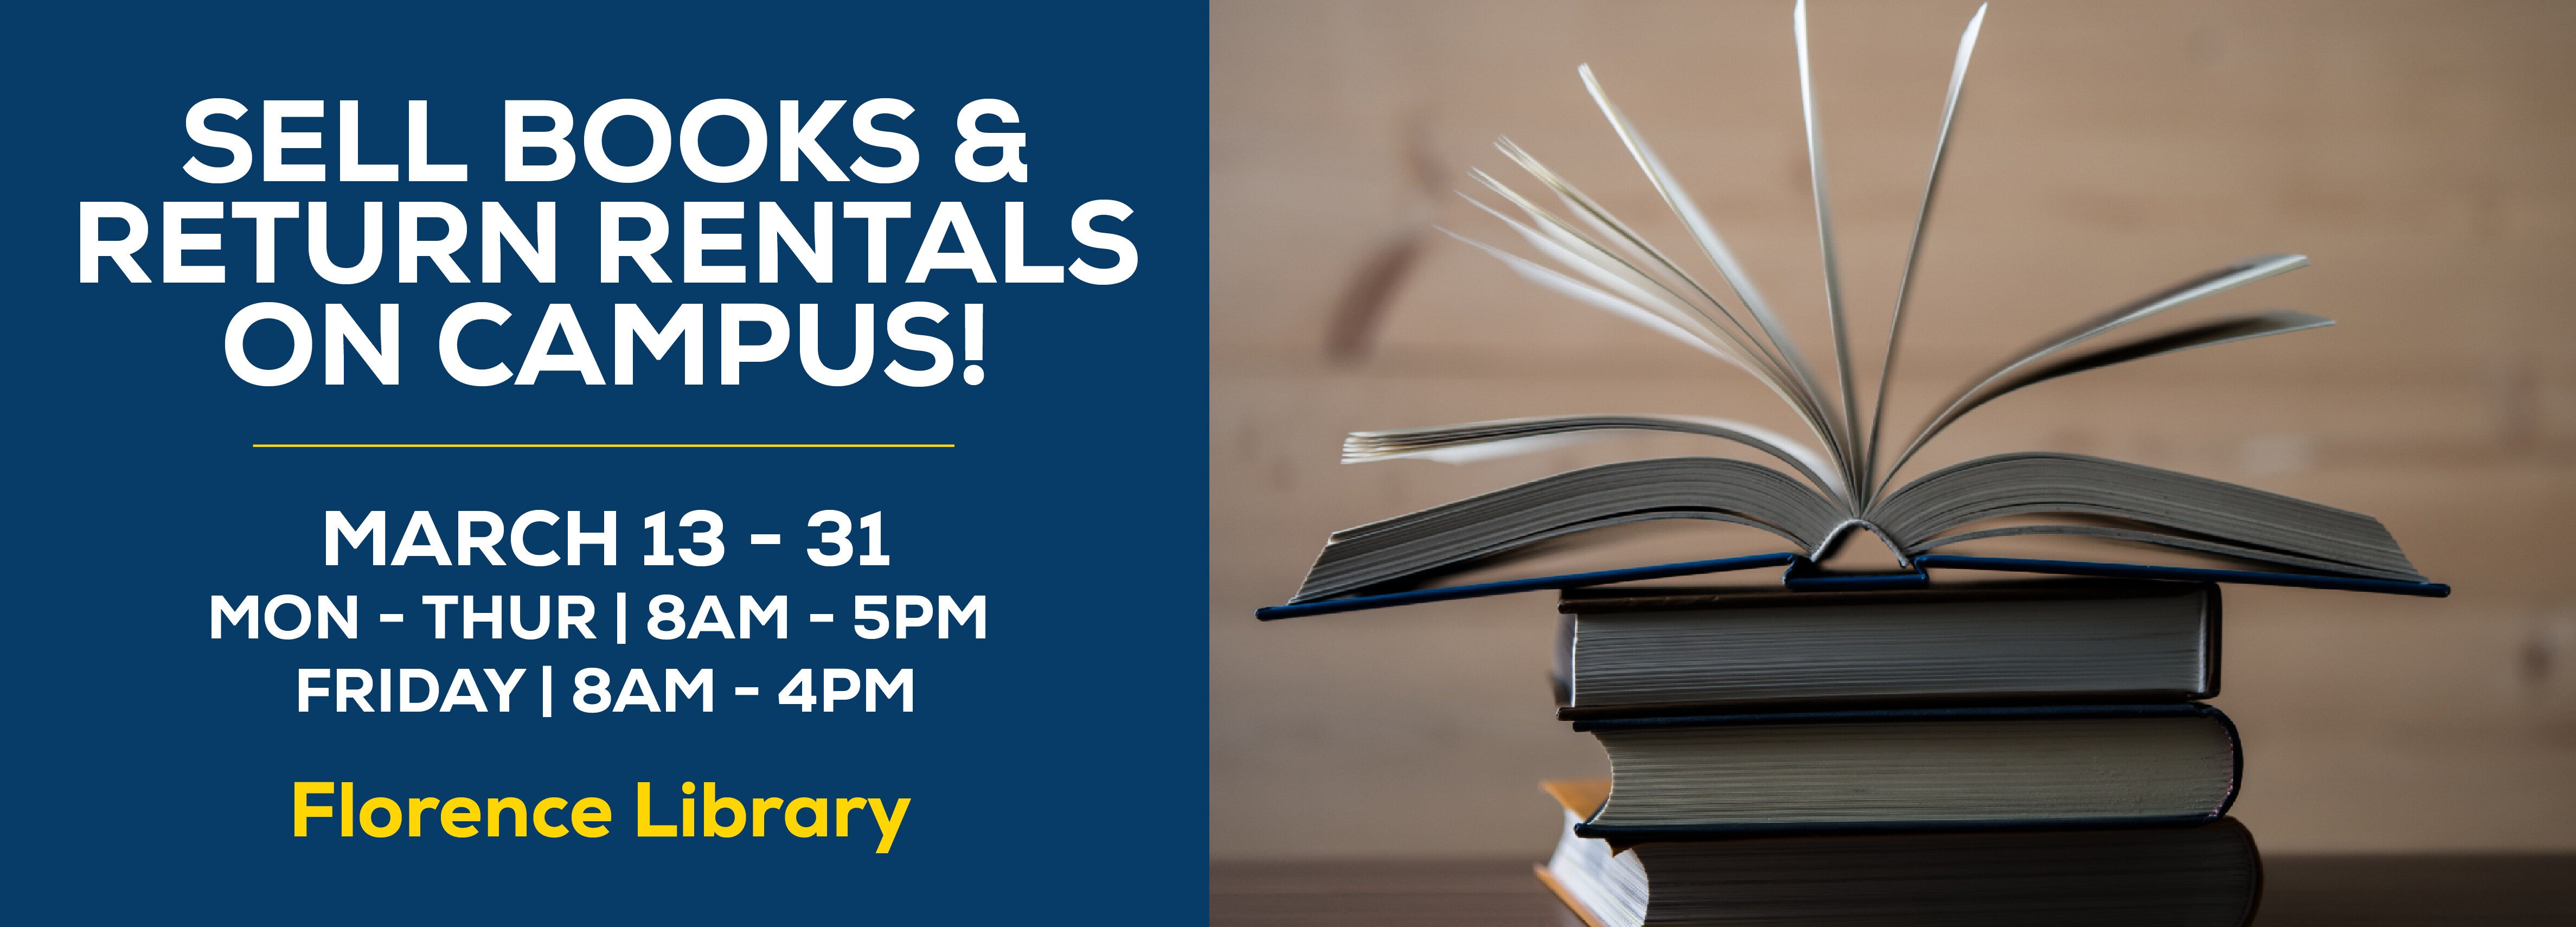 SELL BOOKS & RETURN RENTALS ON CAMPUS! MARCH 13 - 31 MON - THUR | 8AM - 5PM FRIDAY I 8AM - 4PM Florence Library